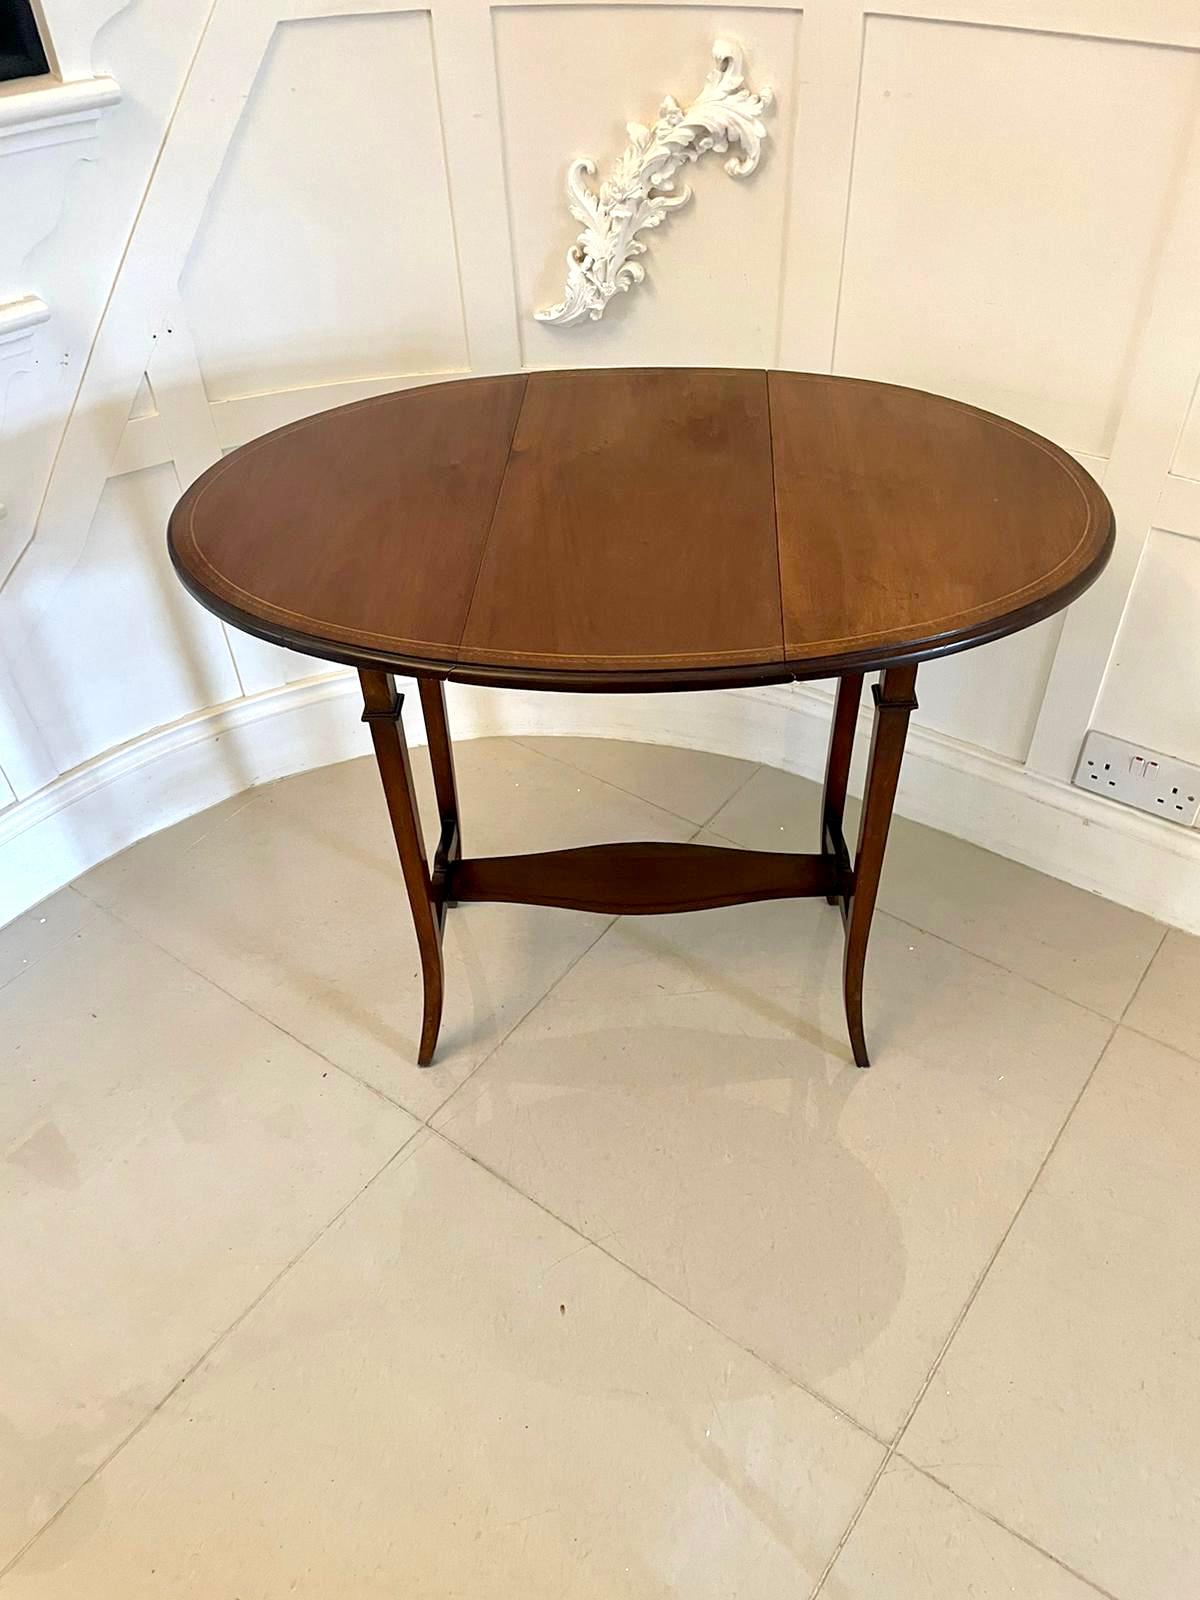 Antique Edwardian Quality Mahogany Inlaid Lamp Table In Good Condition For Sale In Suffolk, GB